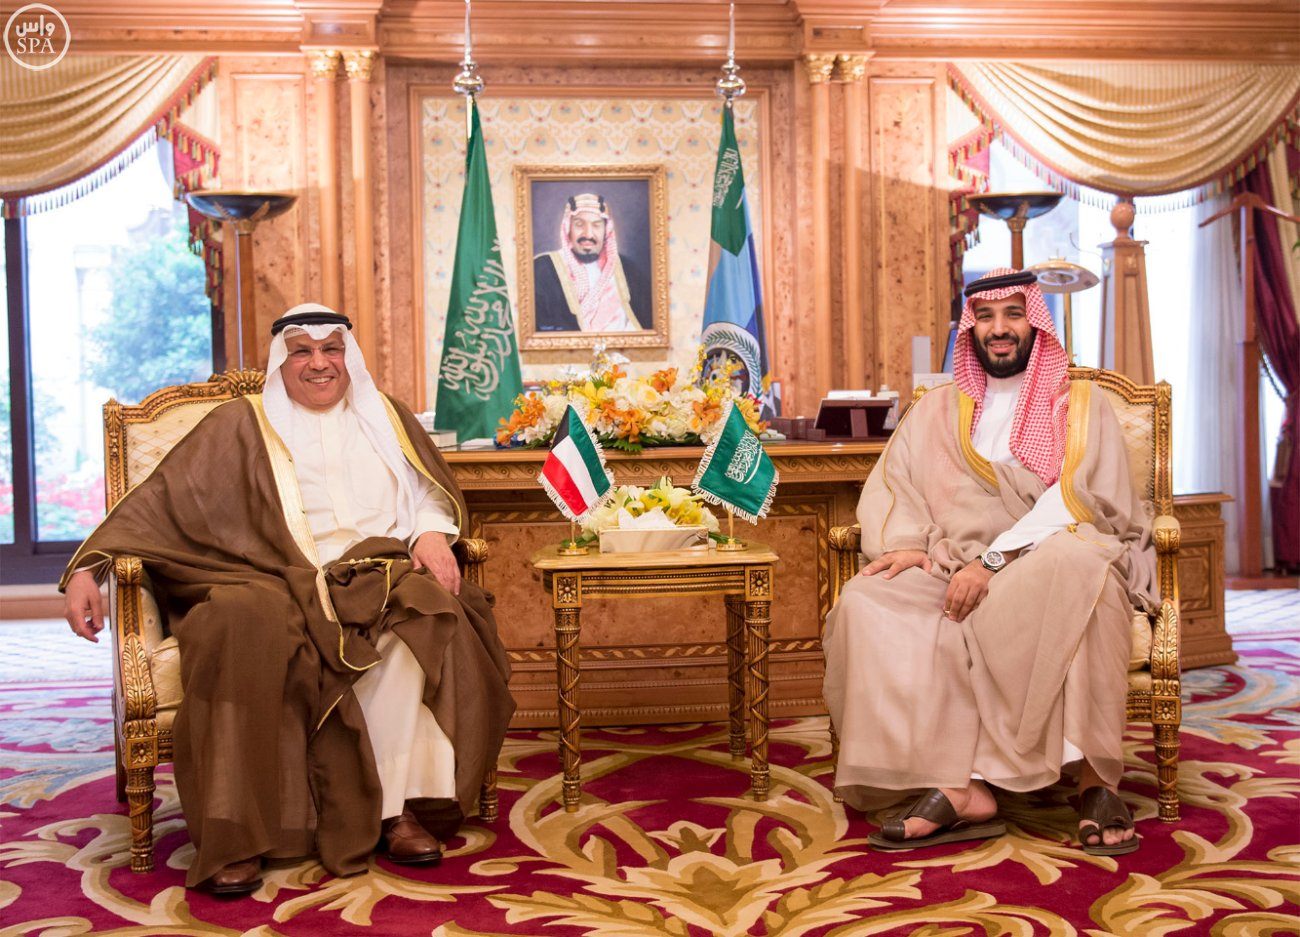 Minister of Defense, President of the Royal Court and Special Advisor to the Custodian of the Two Holy Mosques Prince Mohammed bin Salman bin Abdulaziz with Kuwait's Deputy Prime Minister and Minister of Defense Sheikh Khaled Al-Jarrah Al-Sabah